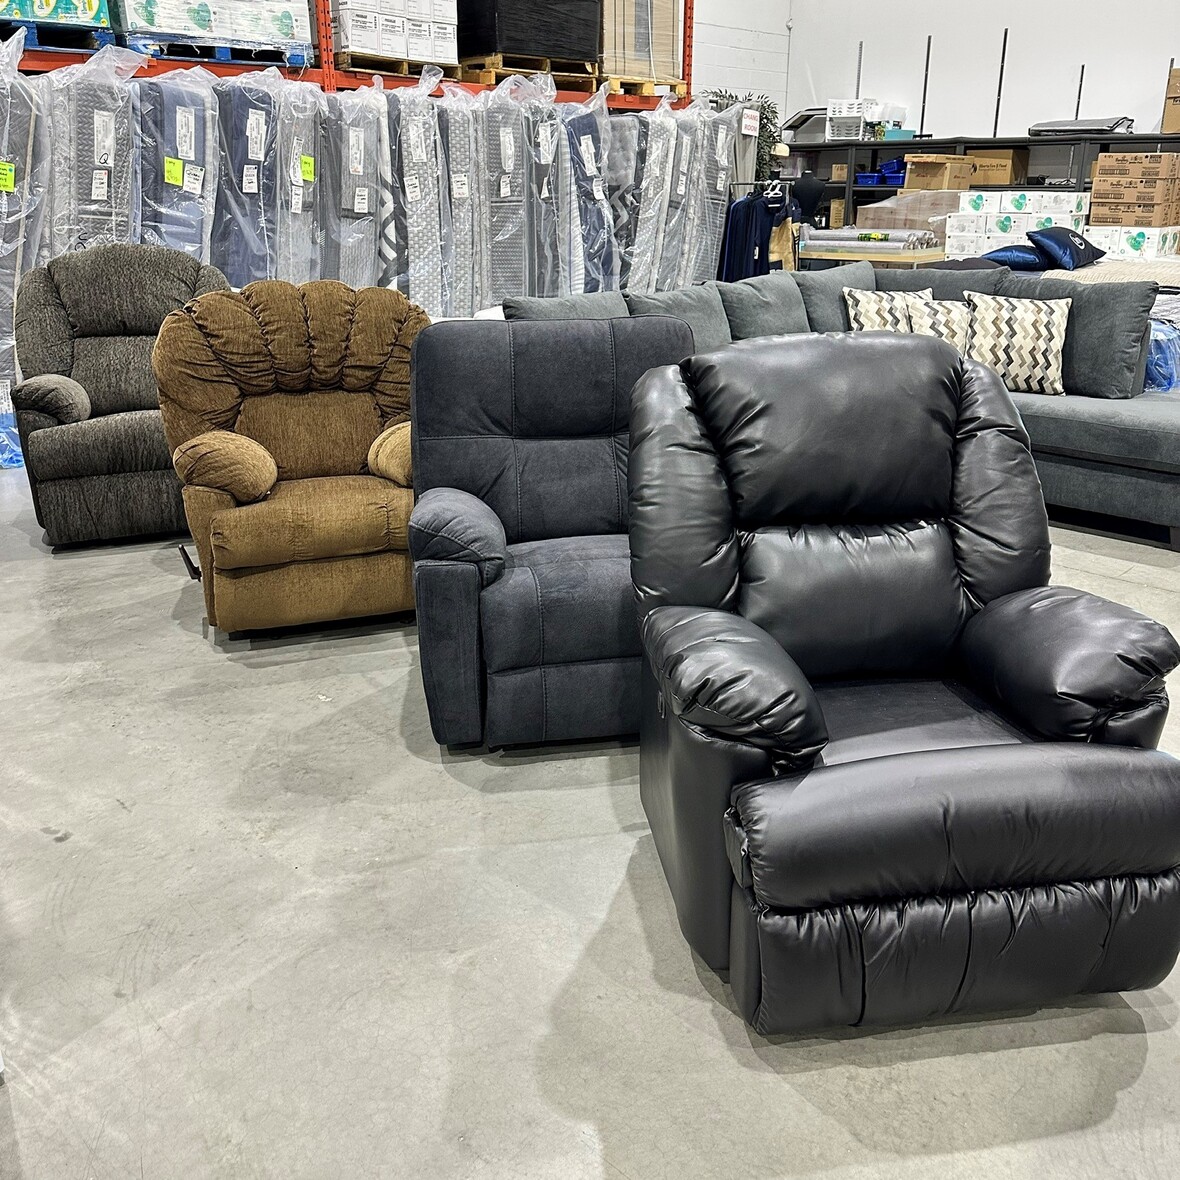 Recliners